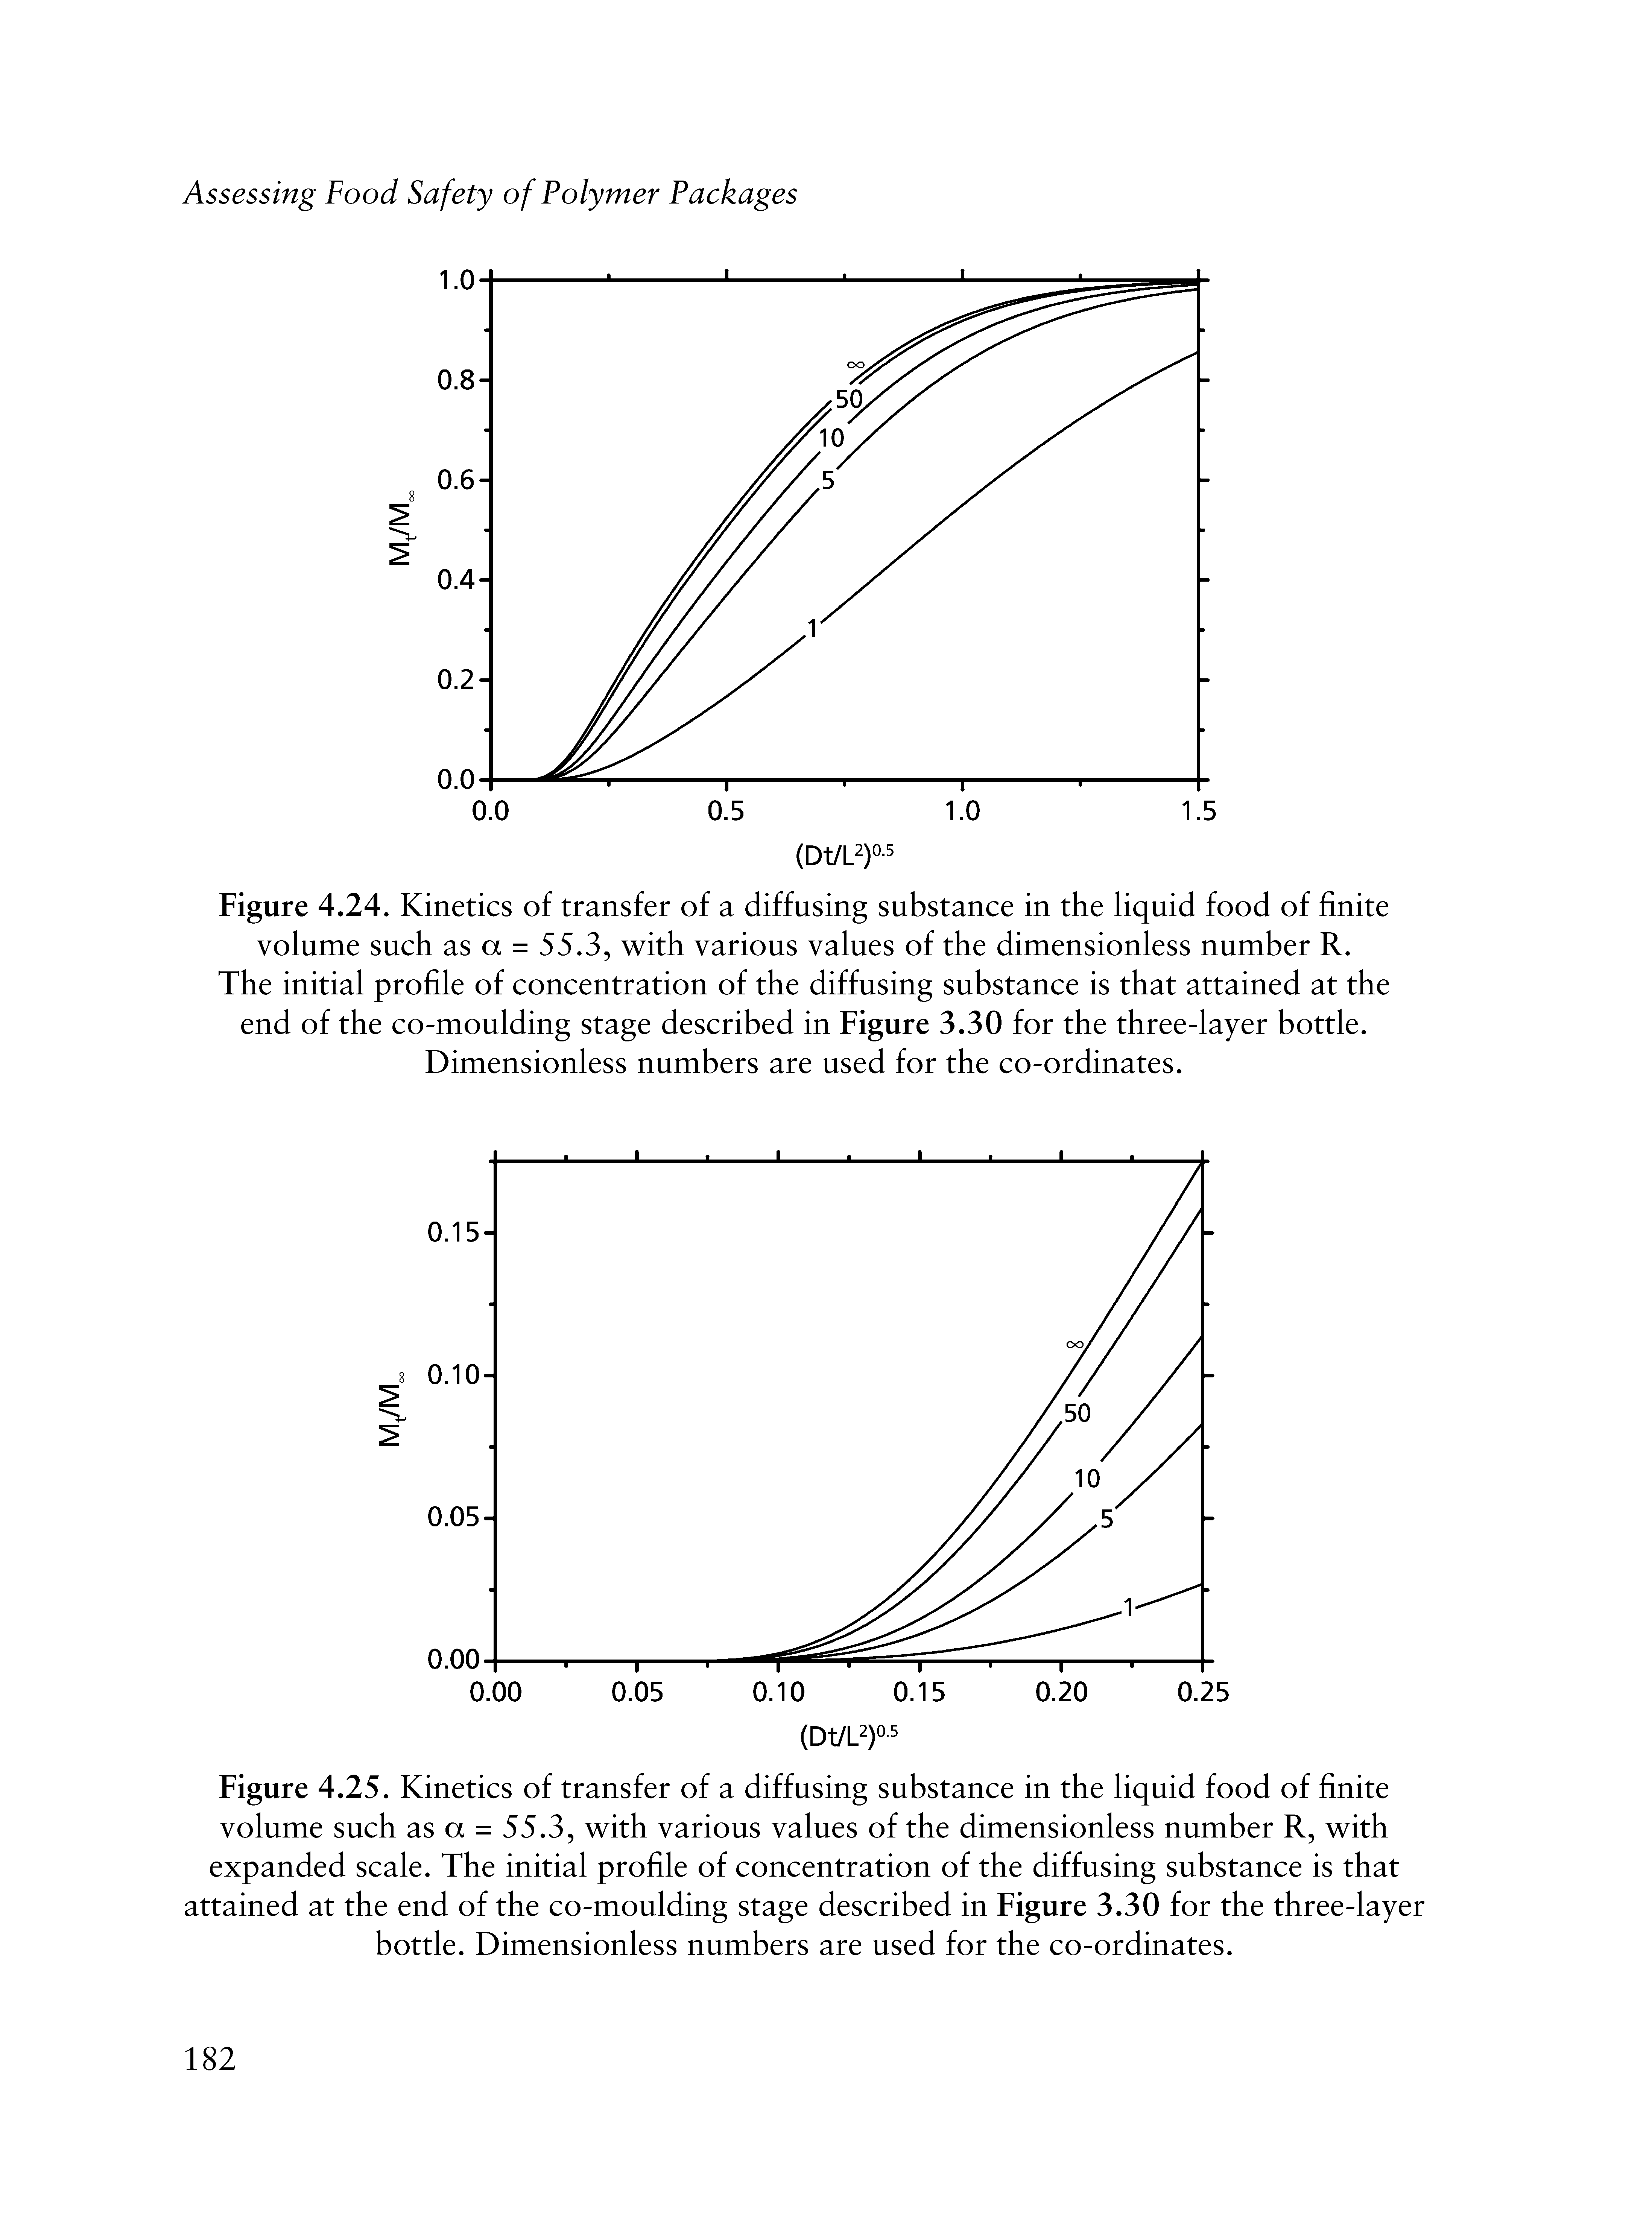 Figure 4.24. Kinetics of transfer of a diffusing substance in the liquid food of finite volume such as a = 55.3, with various values of the dimensionless number R. The initial profile of concentration of the diffusing substance is that attained at the end of the co-moulding stage described in Figure 3.30 for the three-layer bottle. Dimensionless numbers are used for the co-ordinates.